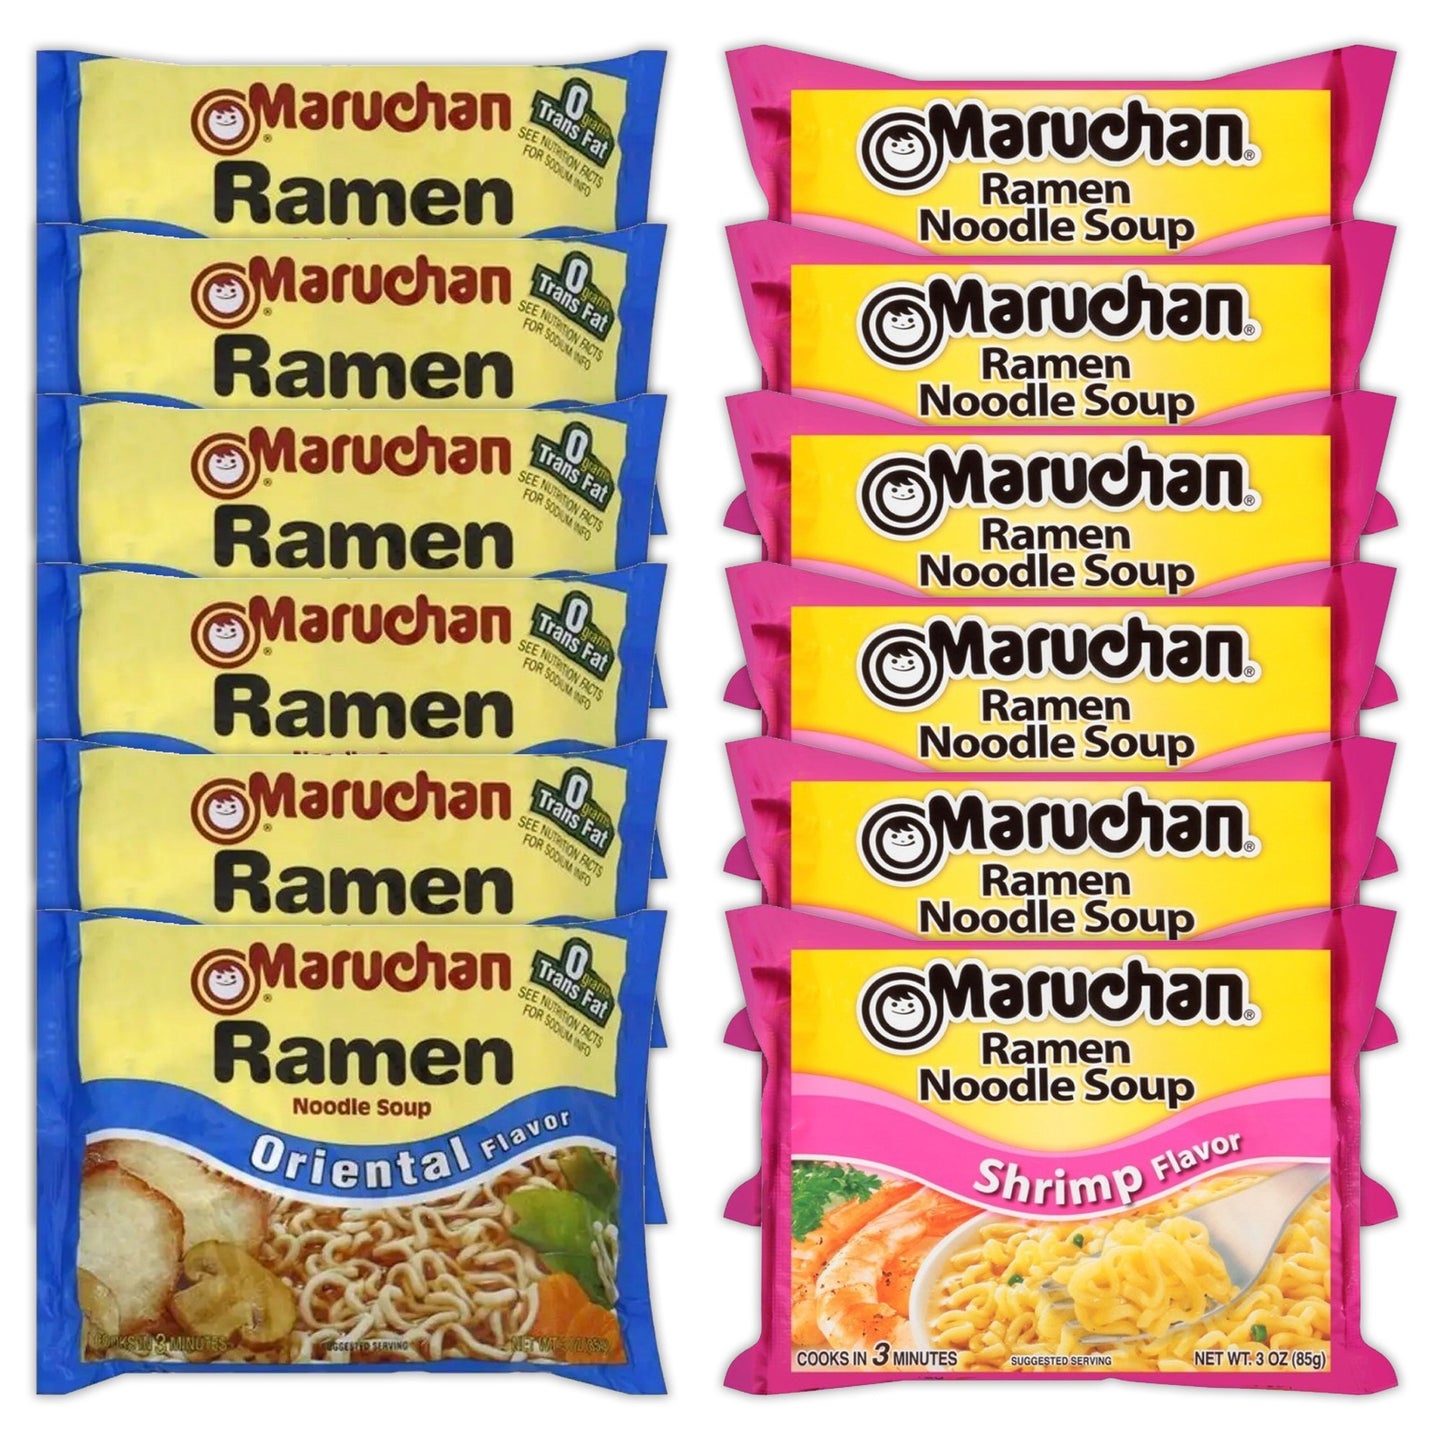 Maruchan Ramen Instant Noodle Soup Variety, 2 Flavors - 6 Packs Soy Sauce & 6 Packs Shrimp , 3 Ounce Single Servings Lunch / Dinner Variety